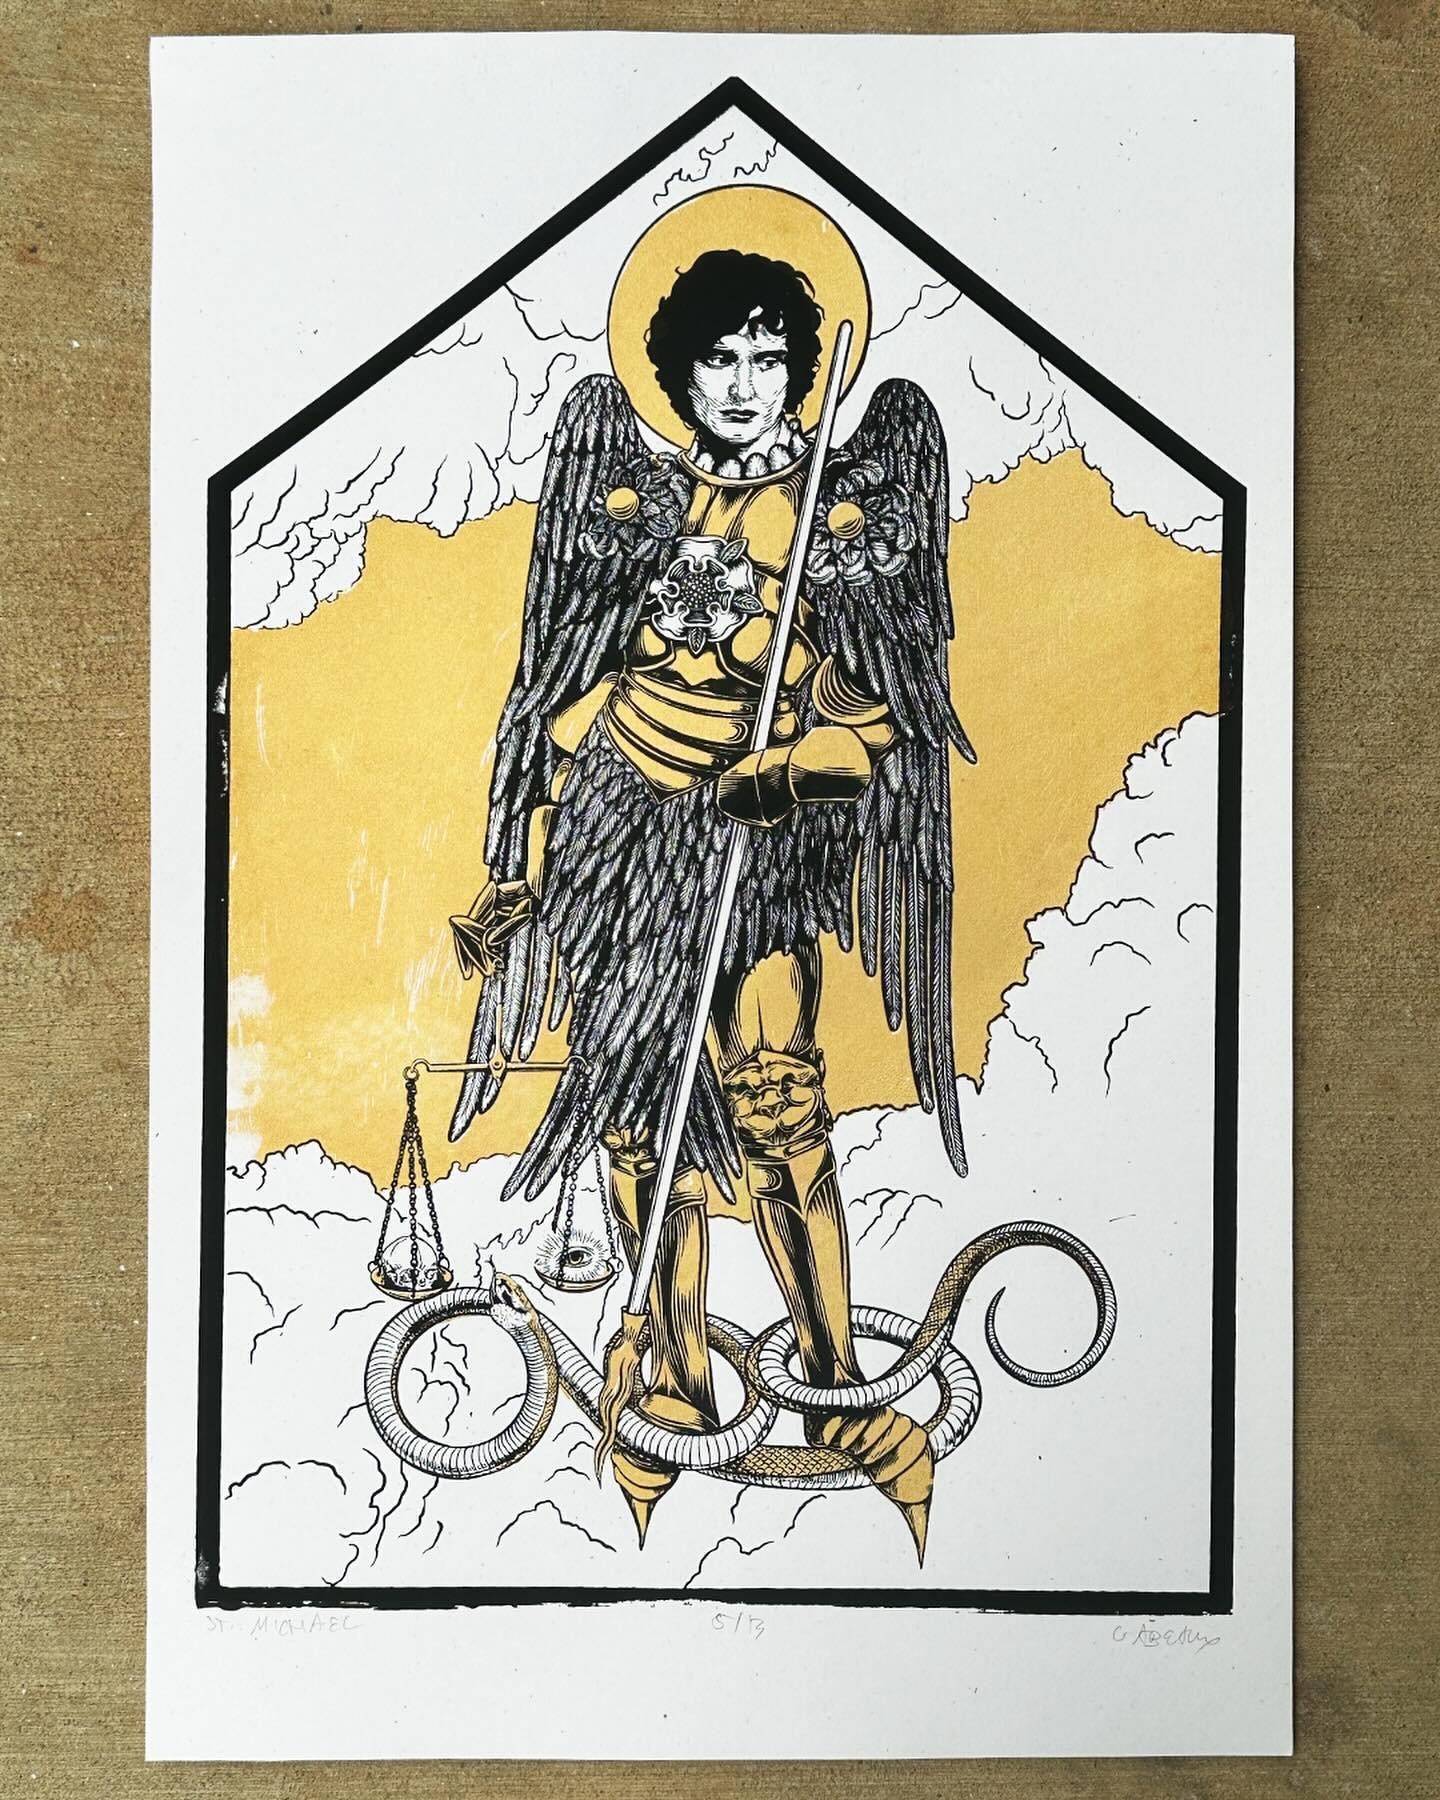 St. Michael is back in the shop (link in bio), now with gold ink! 12&rdquo;x18&rdquo; hand screen printed edition of 30. 

#gabeaux #screenprint #screenprinting #printmaking #detailedart #illustration #goldink #hatching #drawing